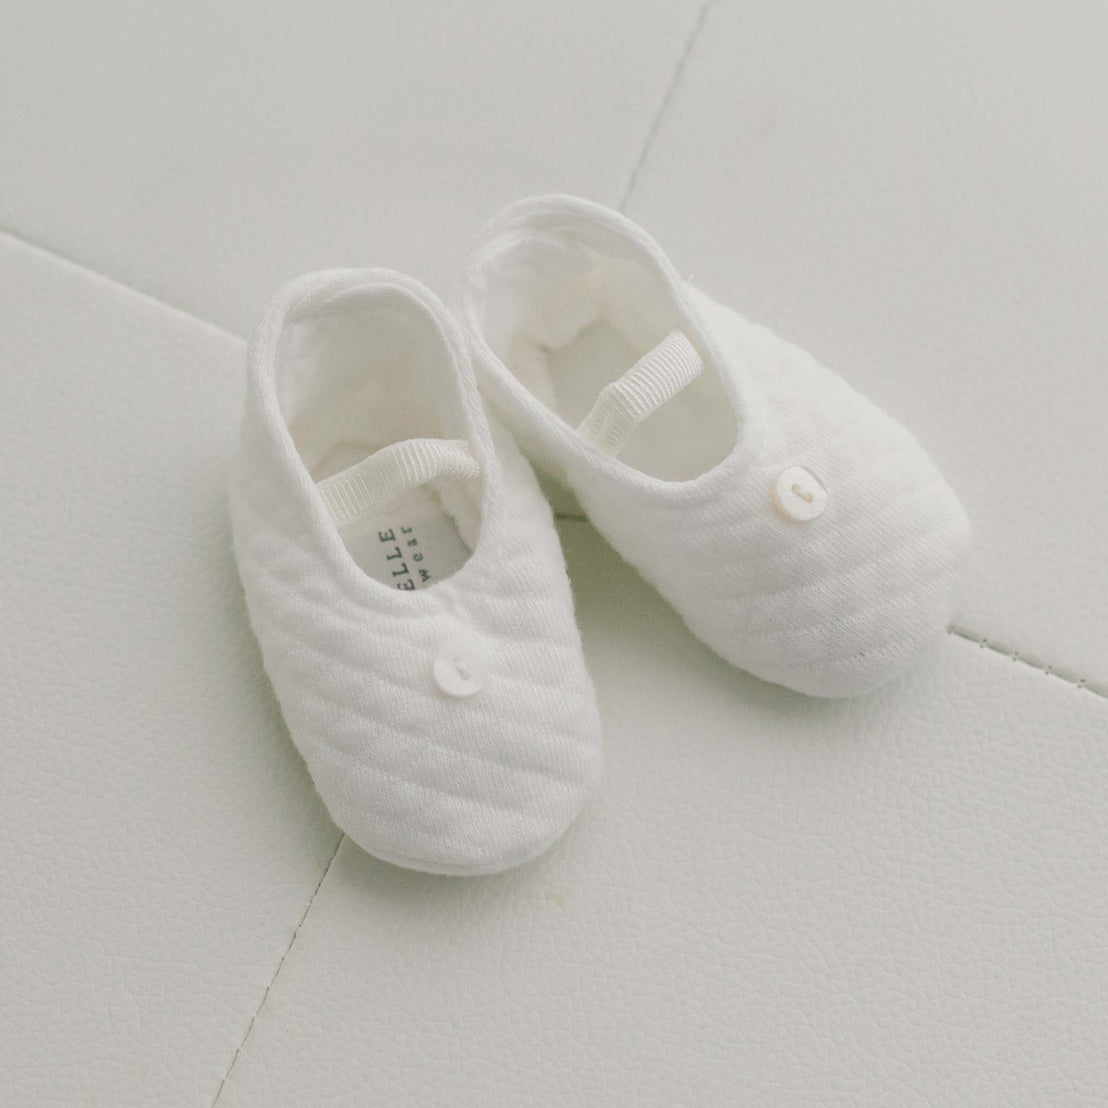 Pair of ivory cotton baby booties